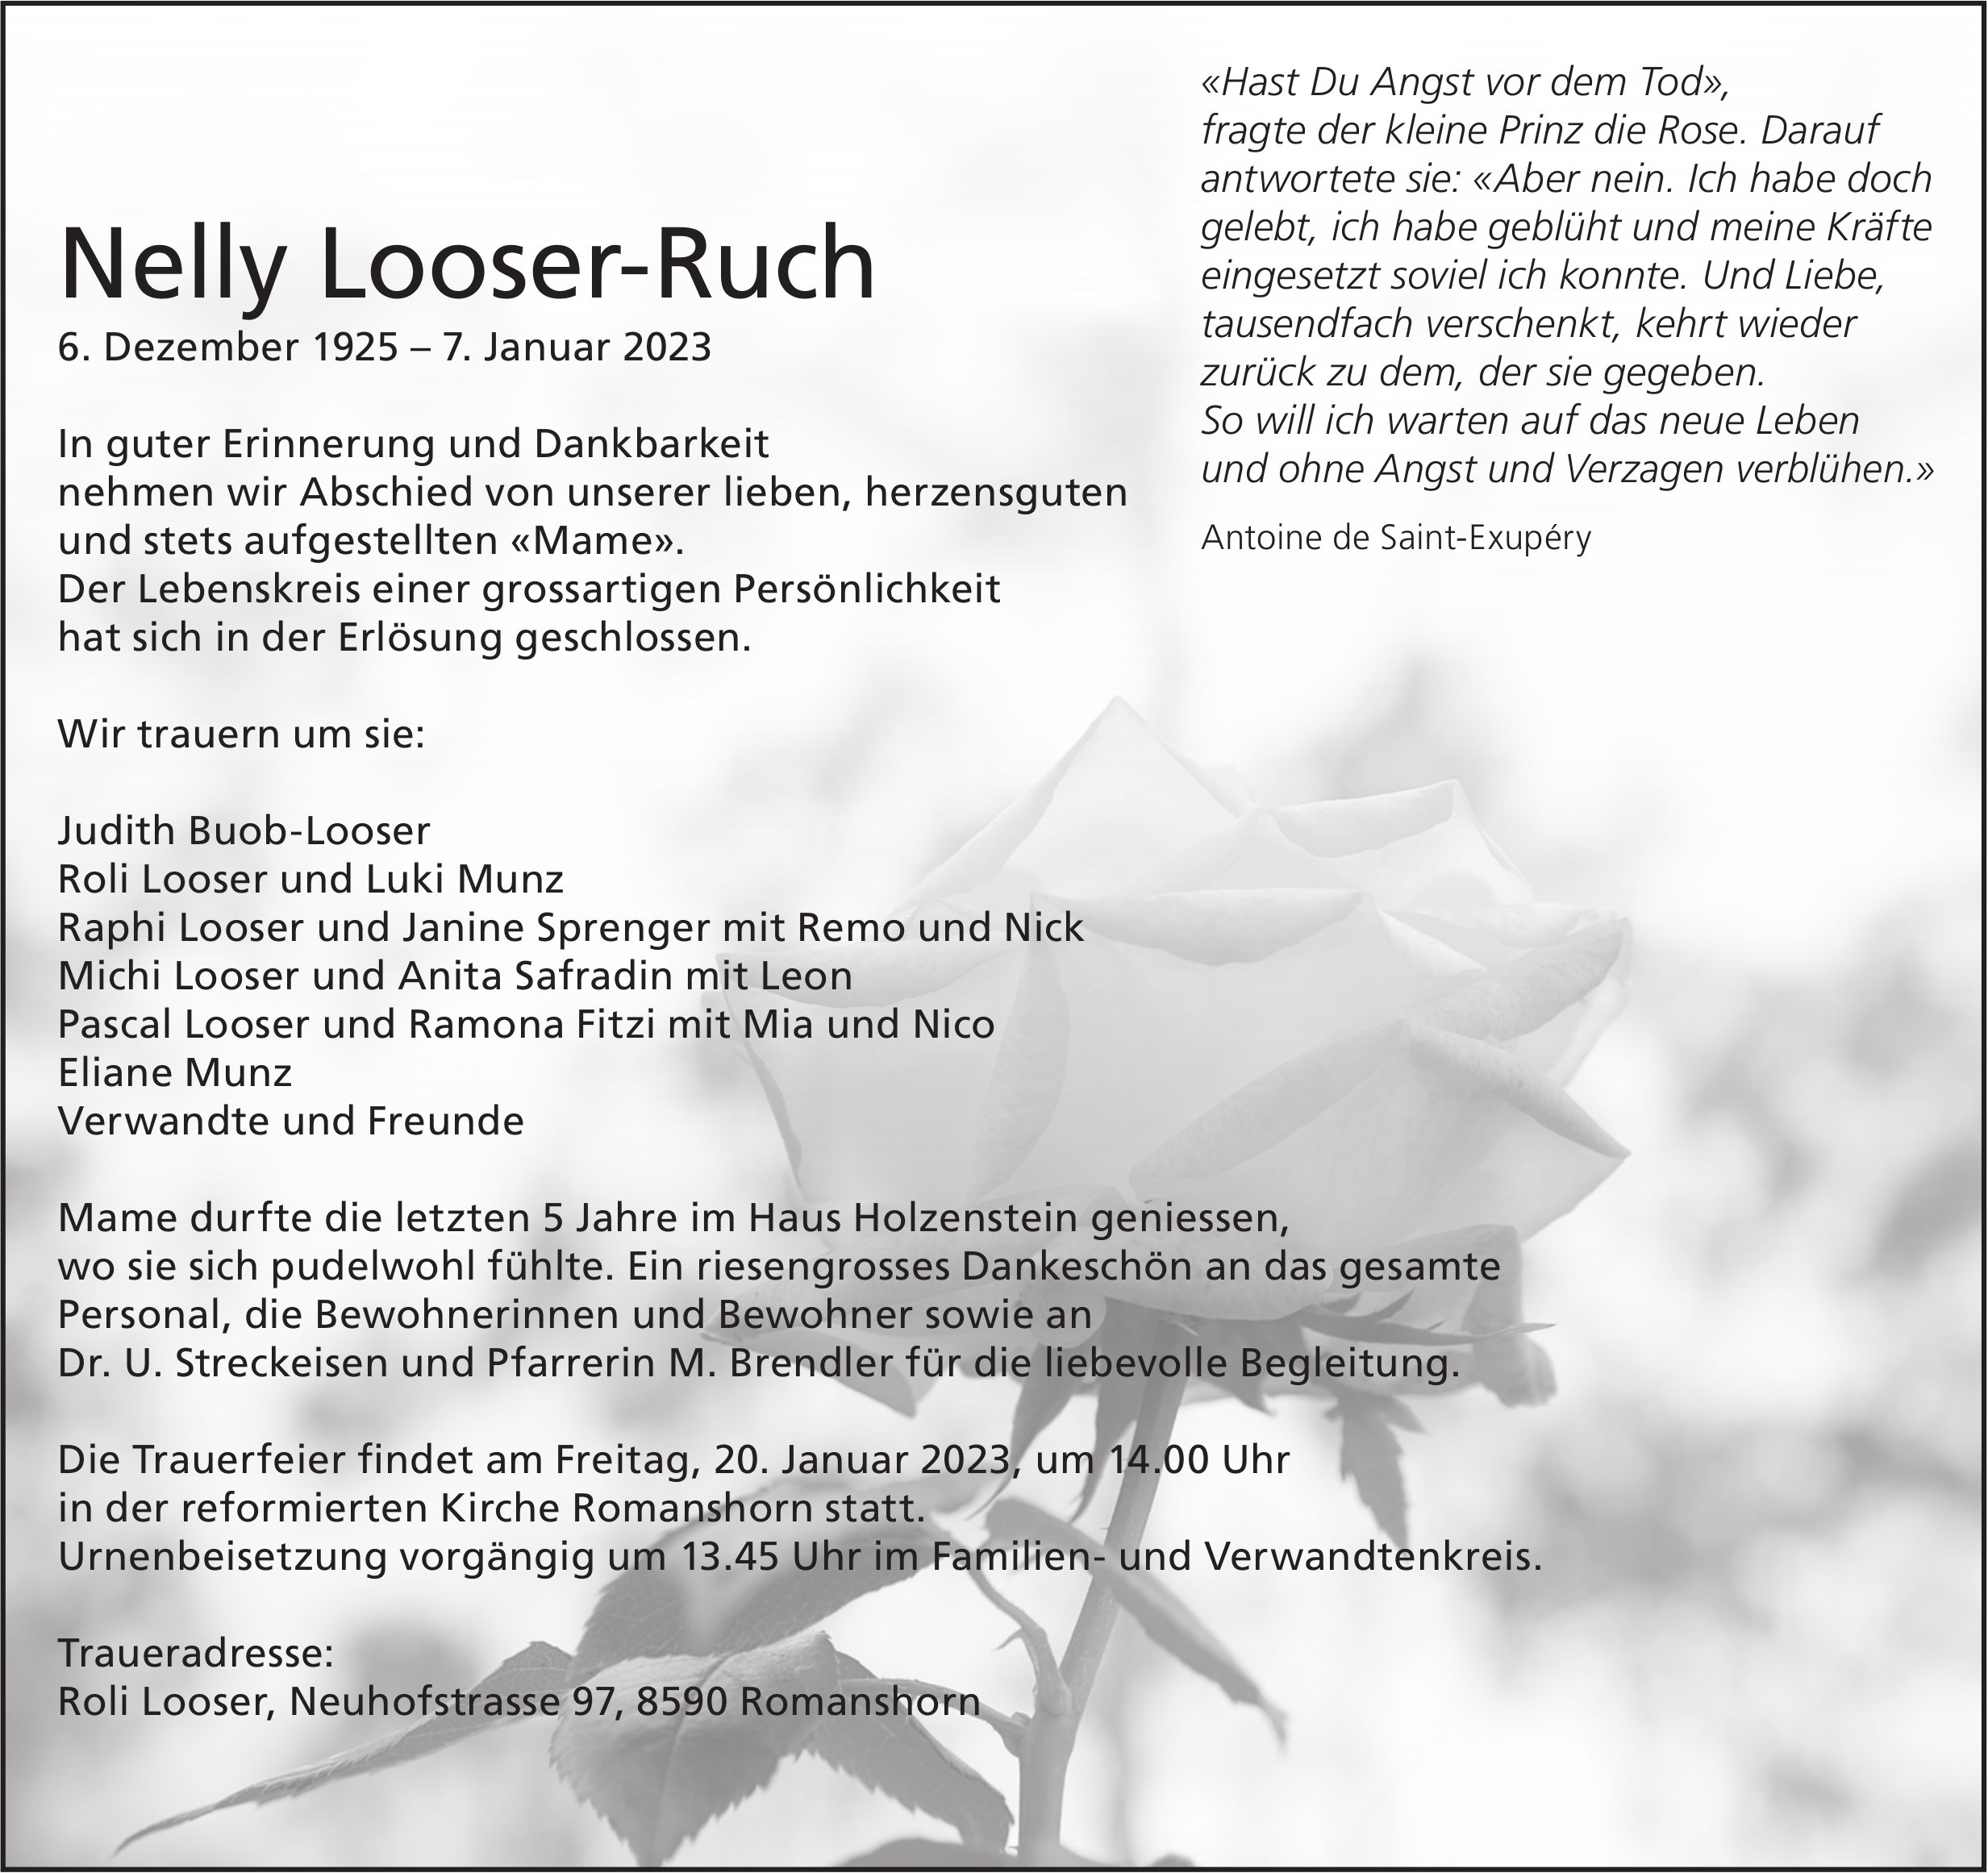 Looser-Ruch Nelly, Januar 2023 / TA